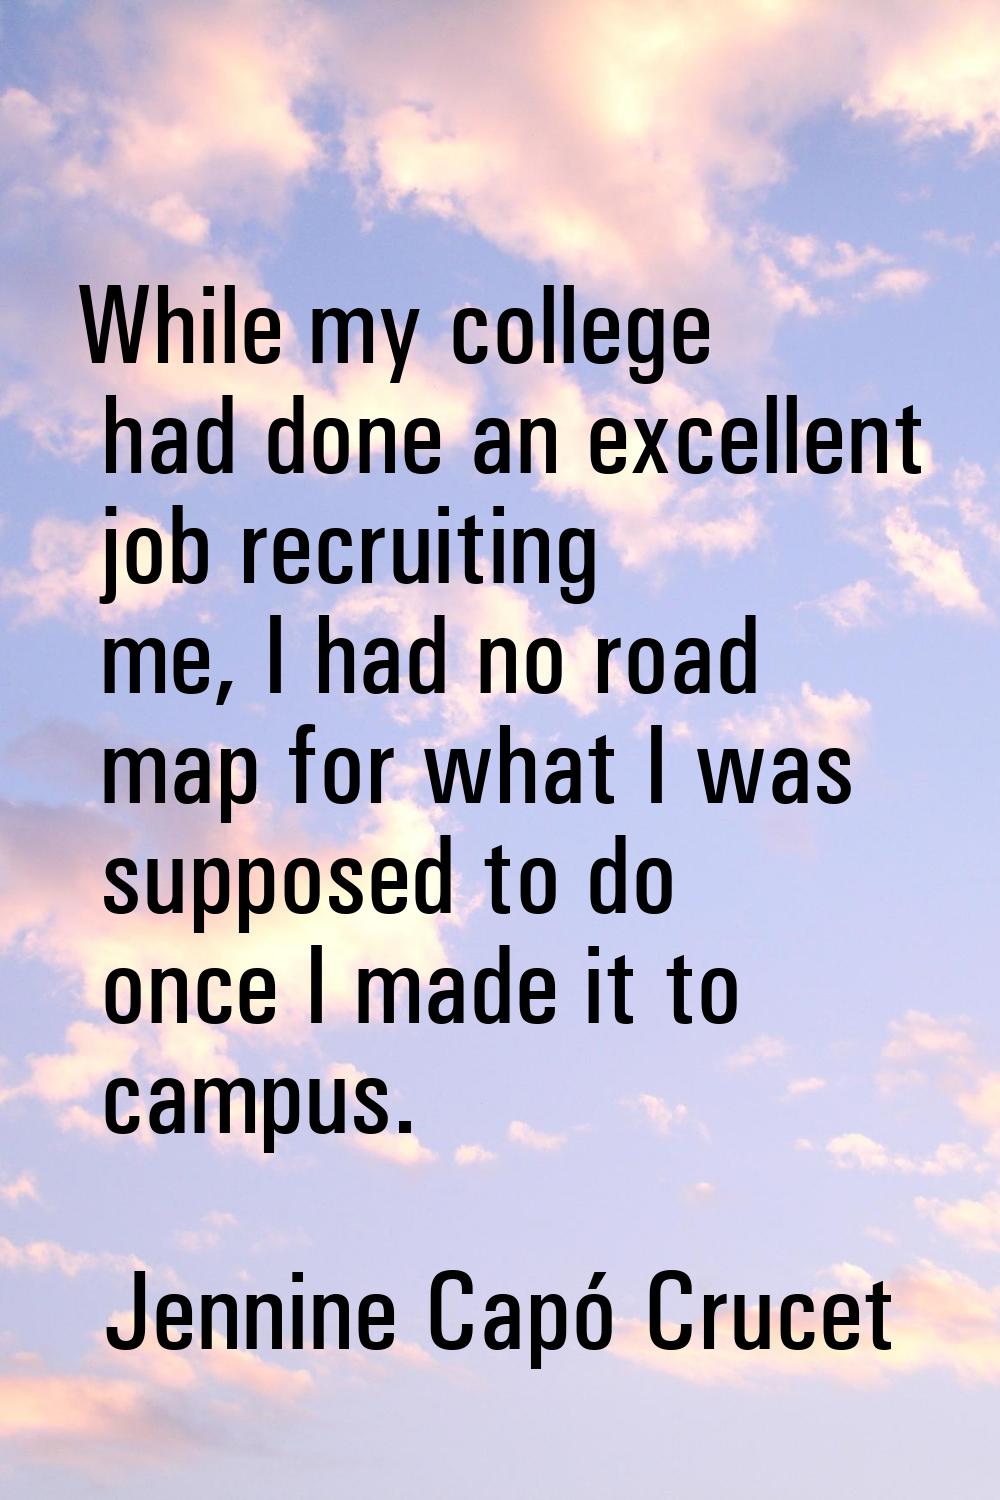 While my college had done an excellent job recruiting me, I had no road map for what I was supposed